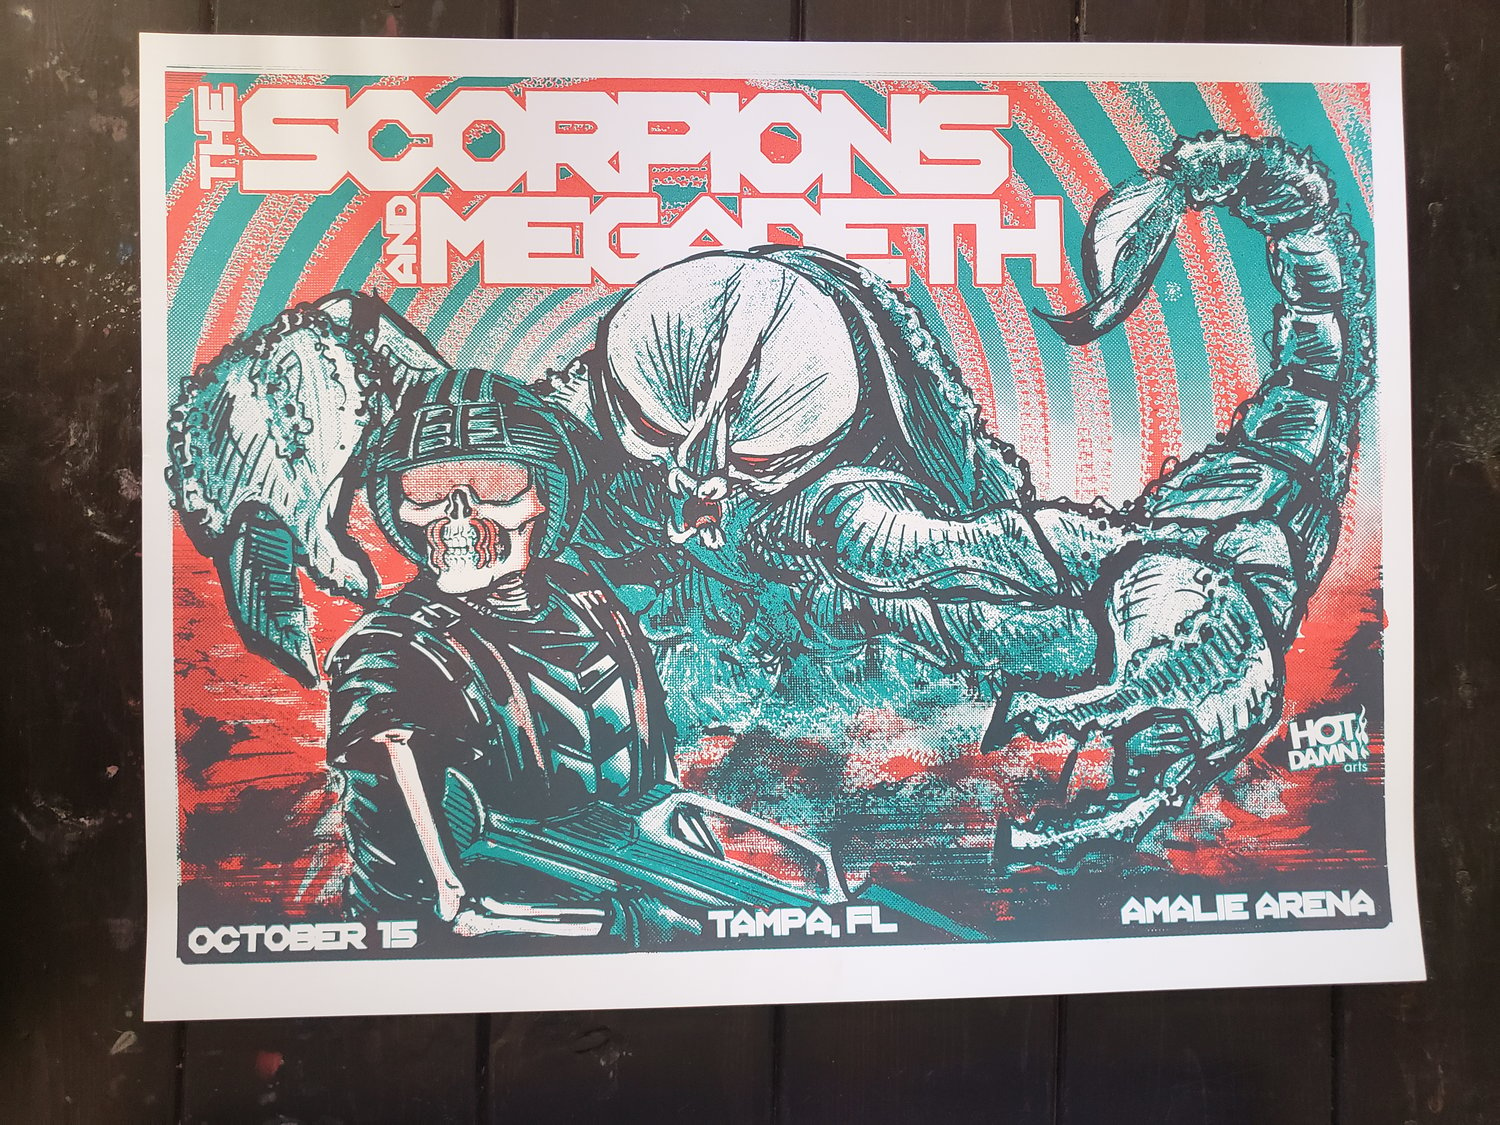 The Scorpions & Megadeth Gig Poster